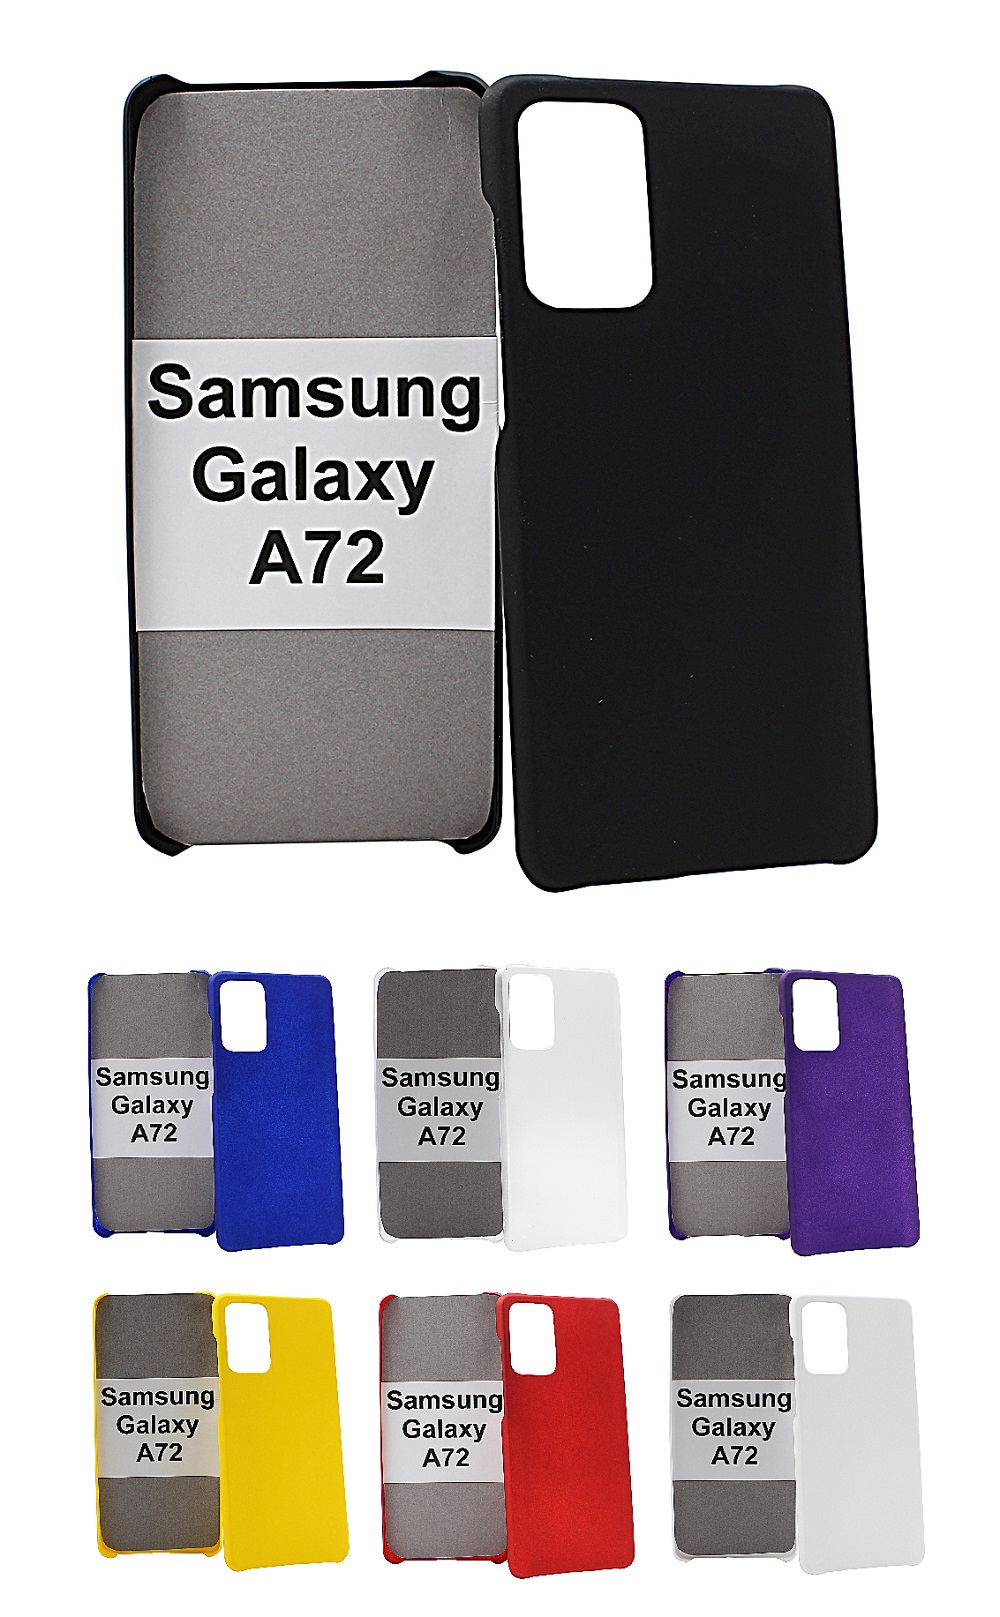 Hardcase Cover Samsung Galaxy A72 (A725F/DS)